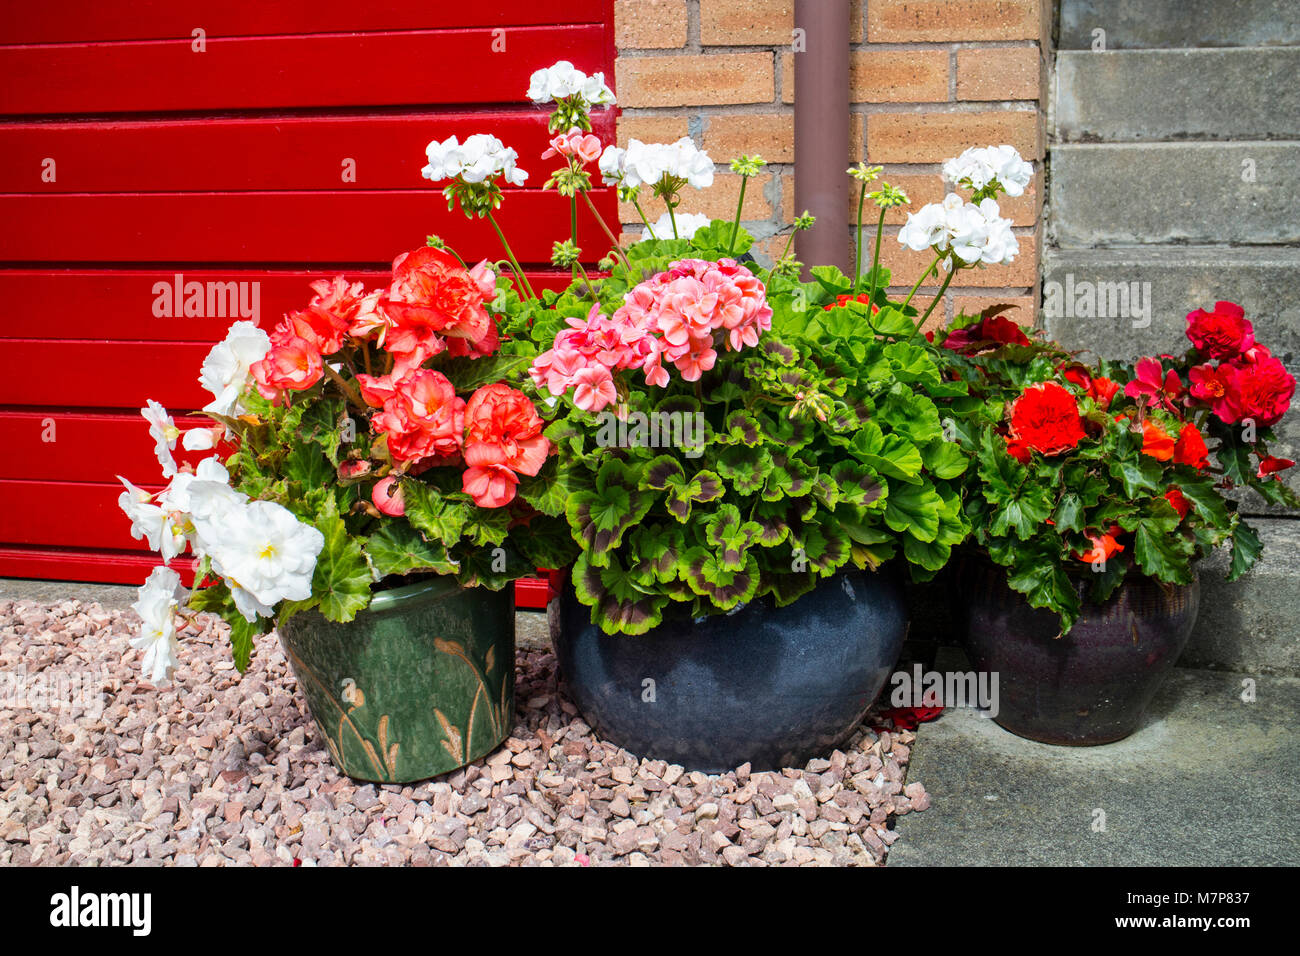 Display of potted begonias and pelargoniums. Stock Photo